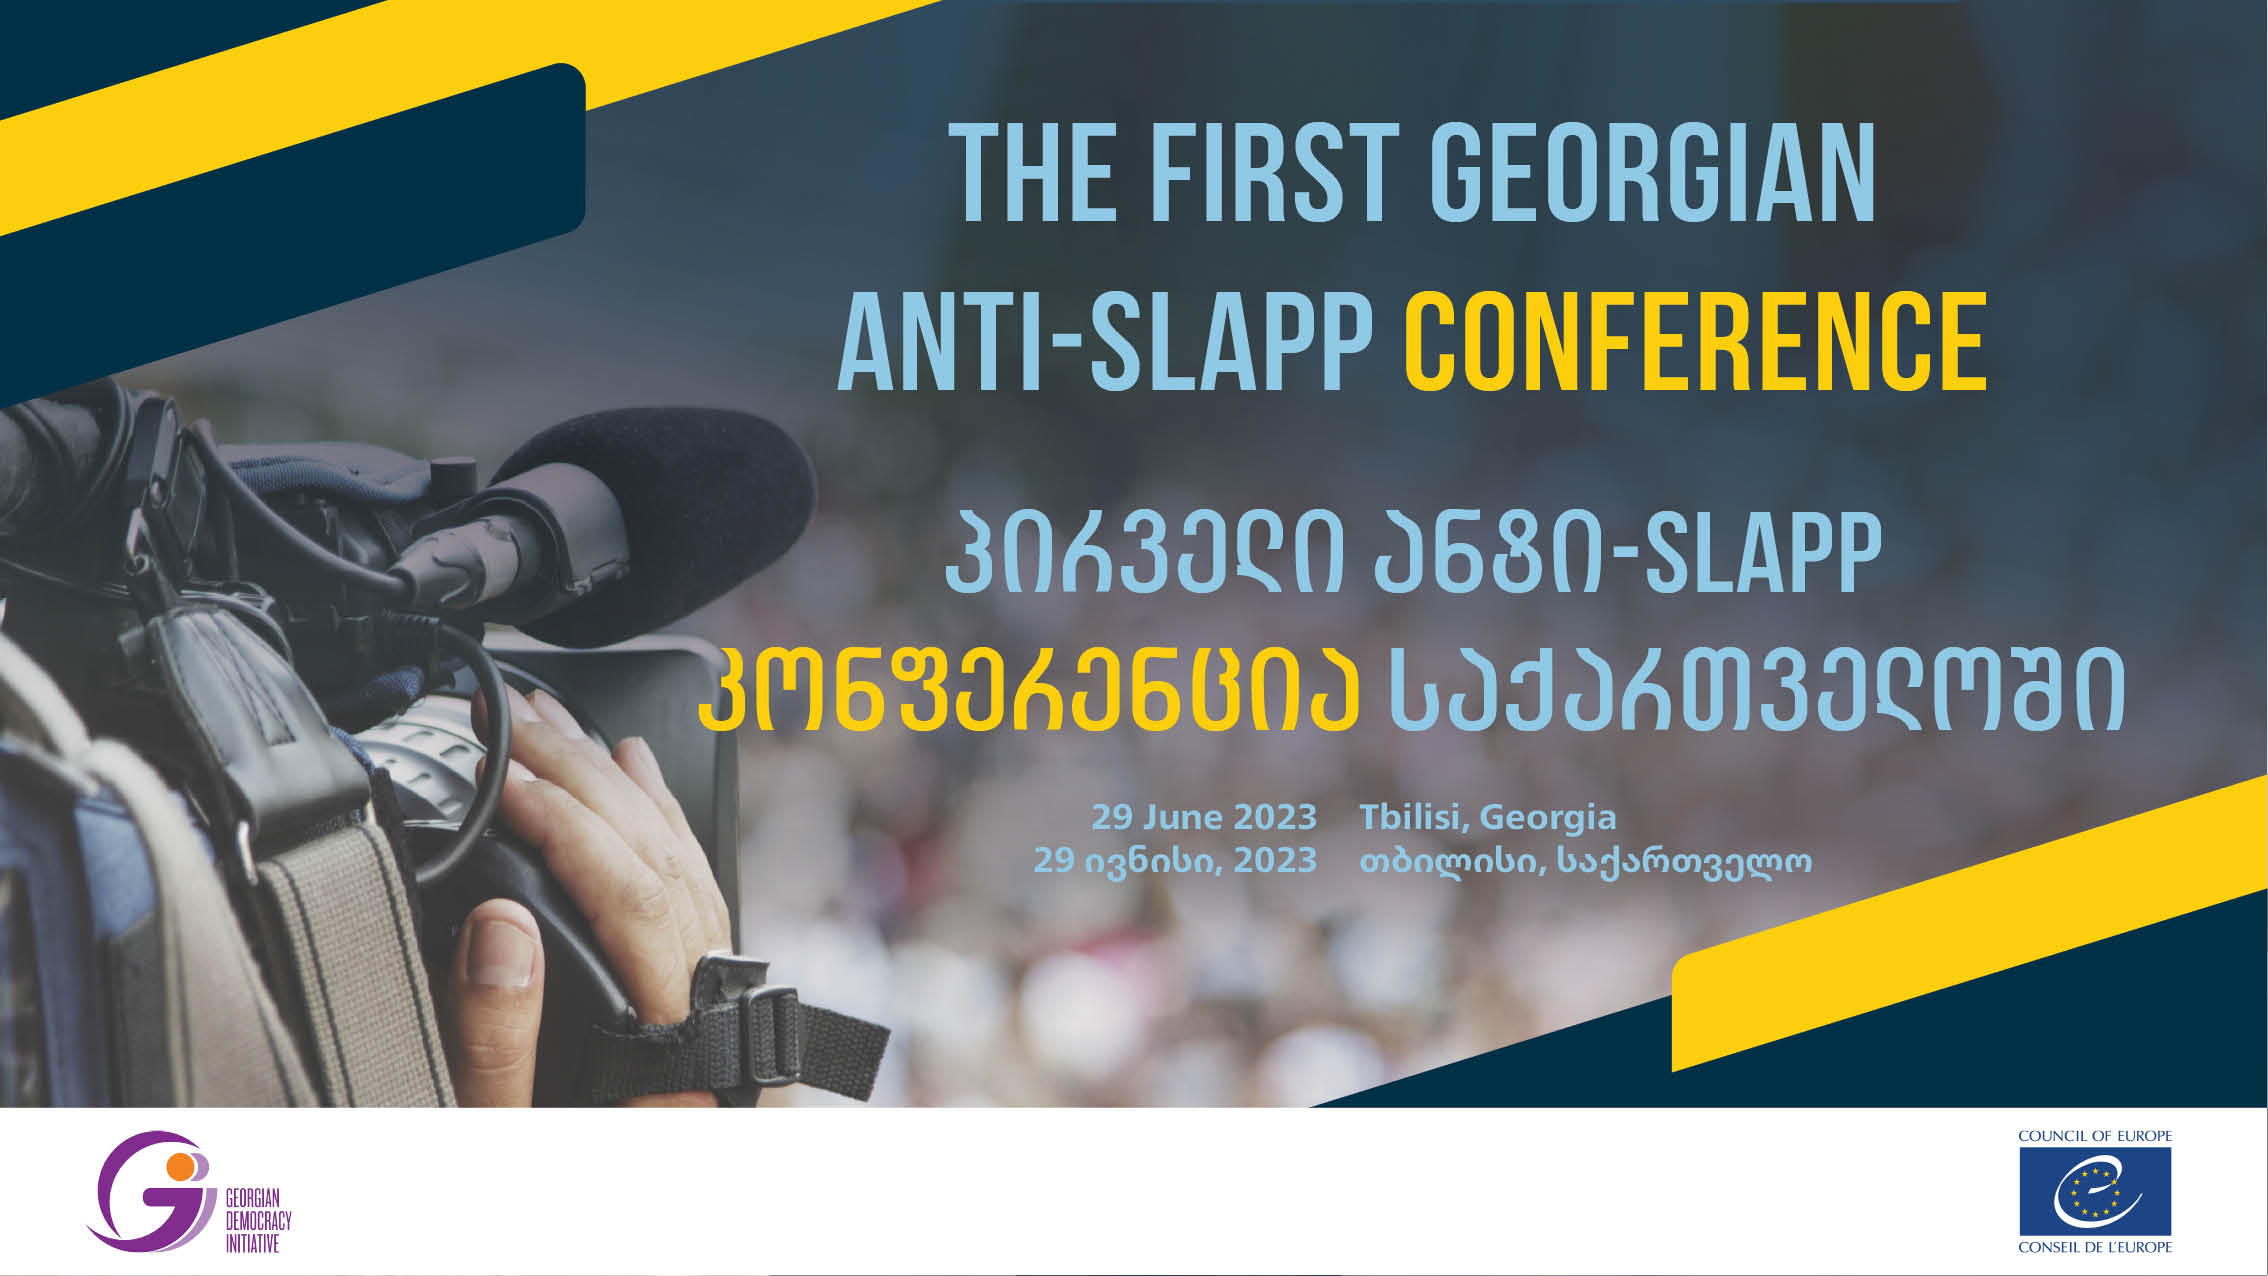 The first Georgian anti-SLAPP conference will take place in Tbilisi